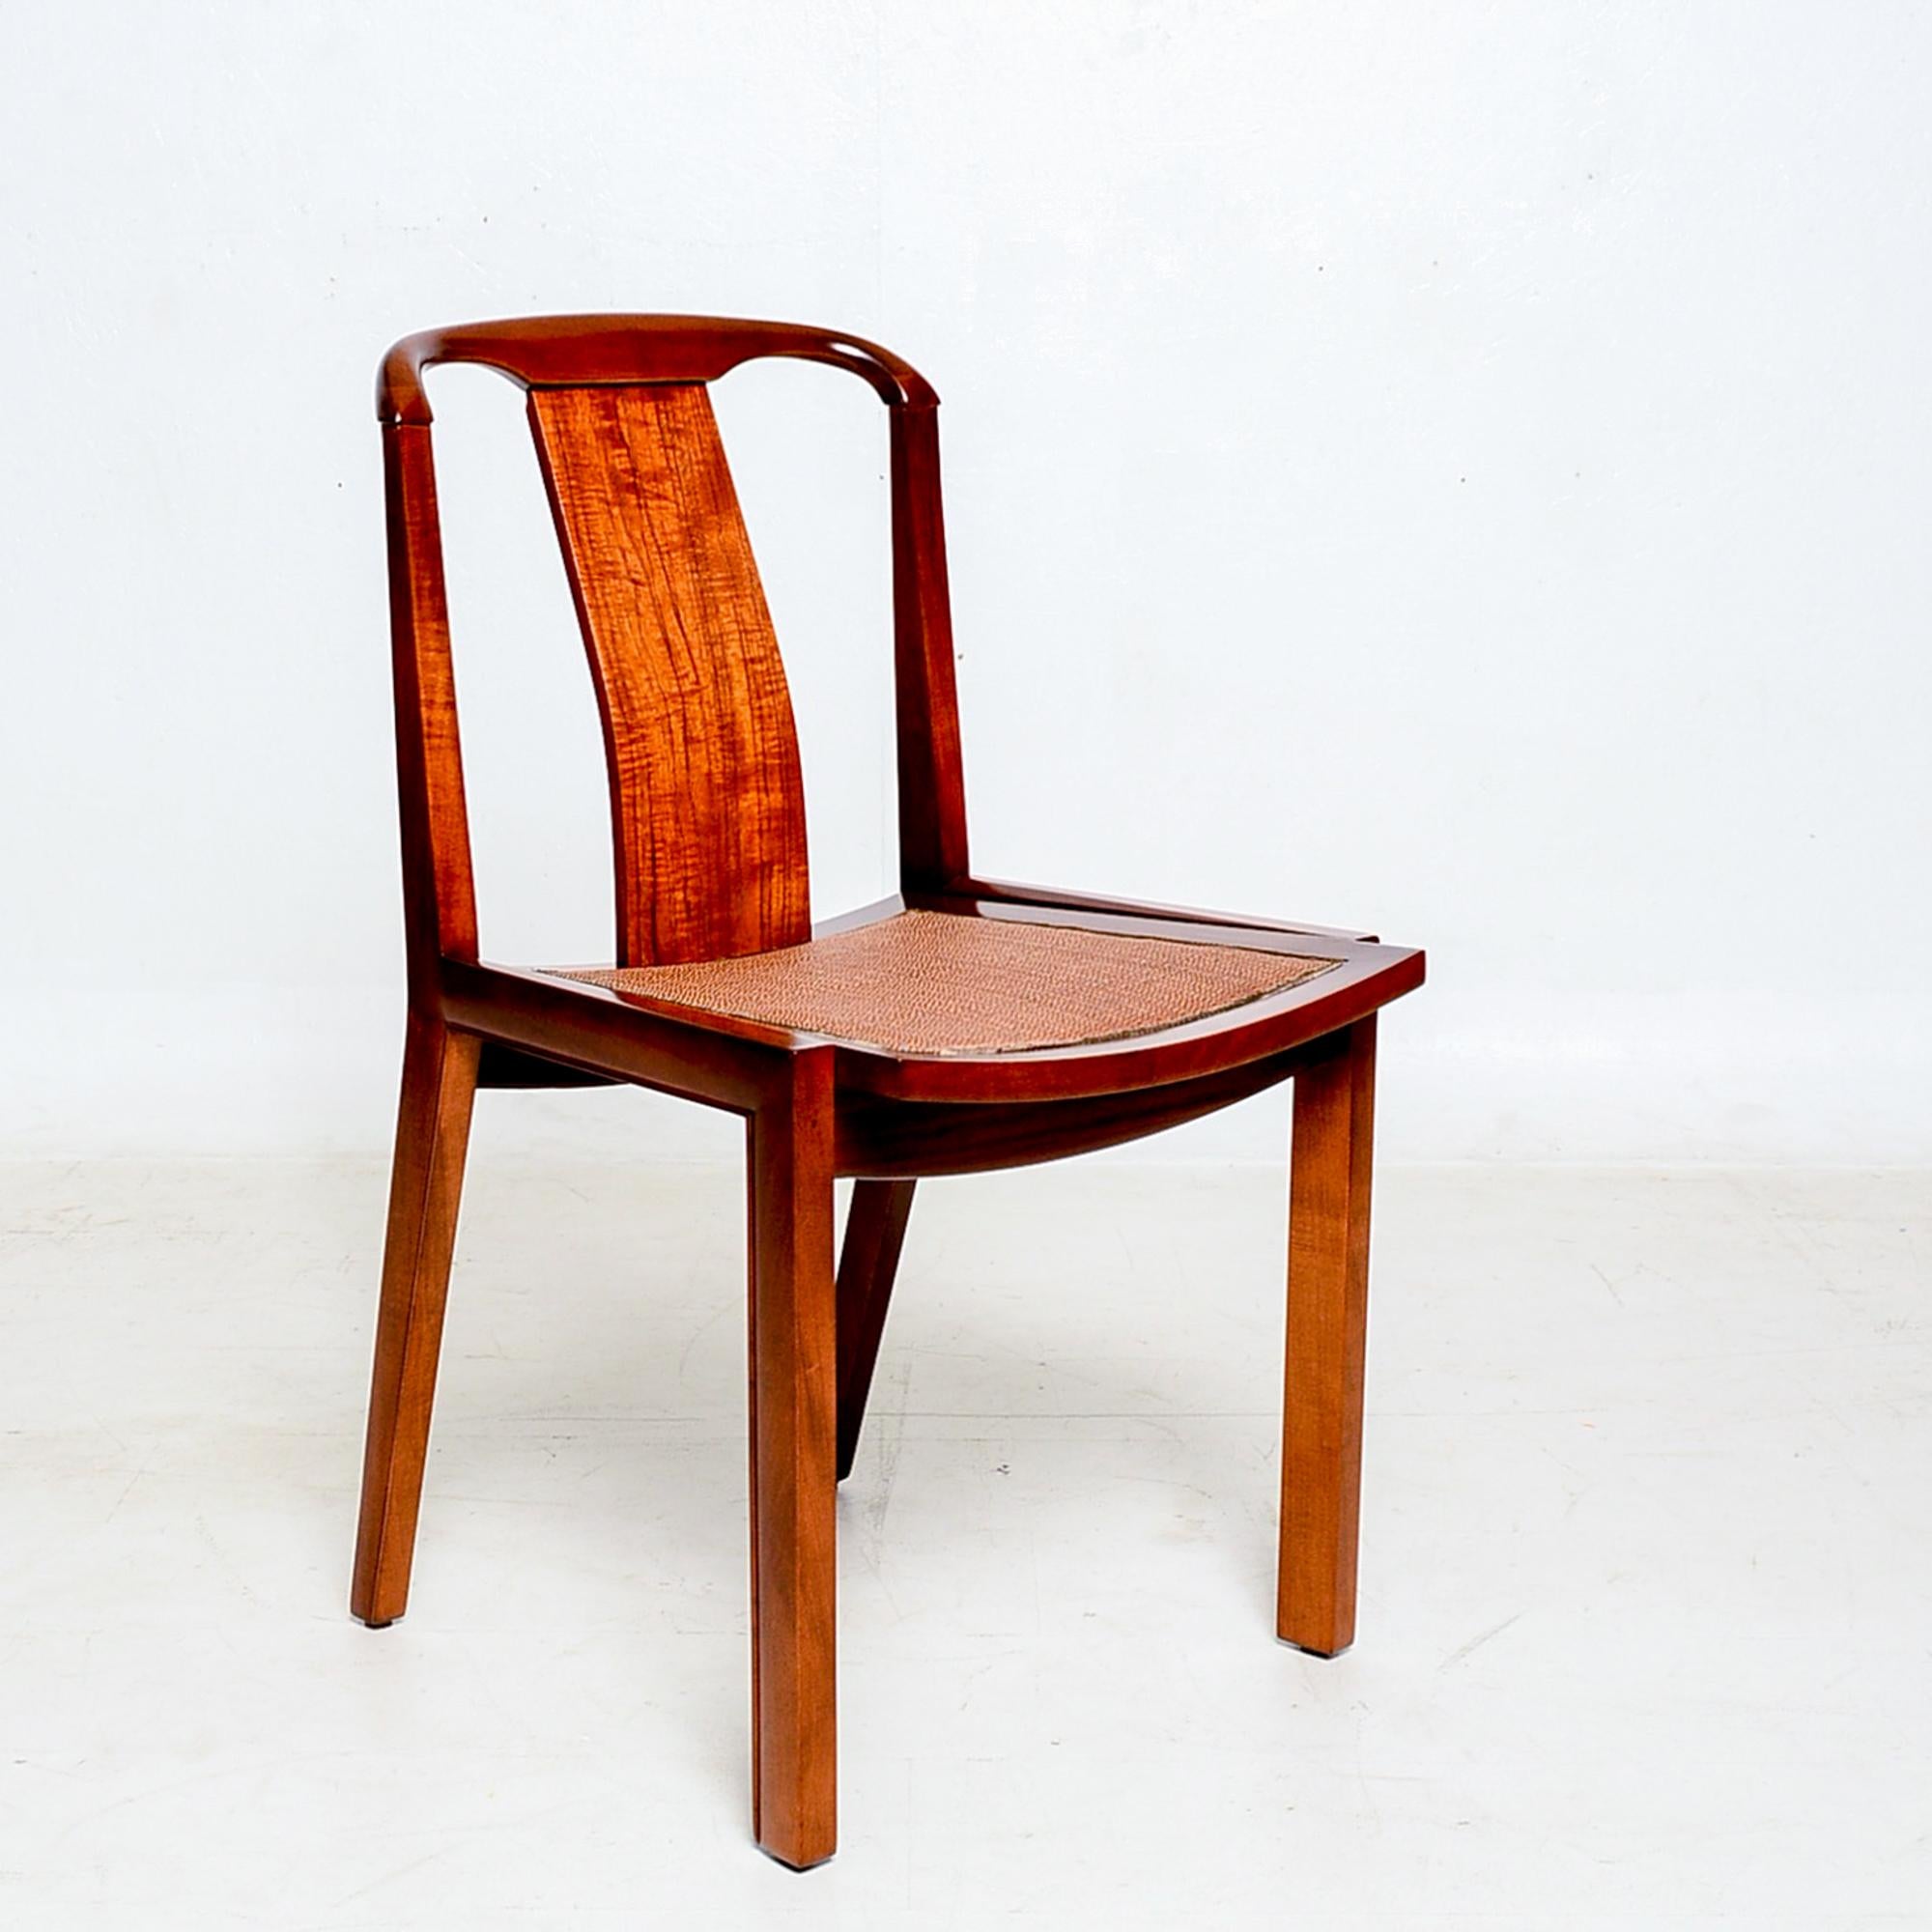 Mid-Century Modern Sophisticated Baker Sculptural Walnut Wood Dining Chairs by Michael Taylor 1950s